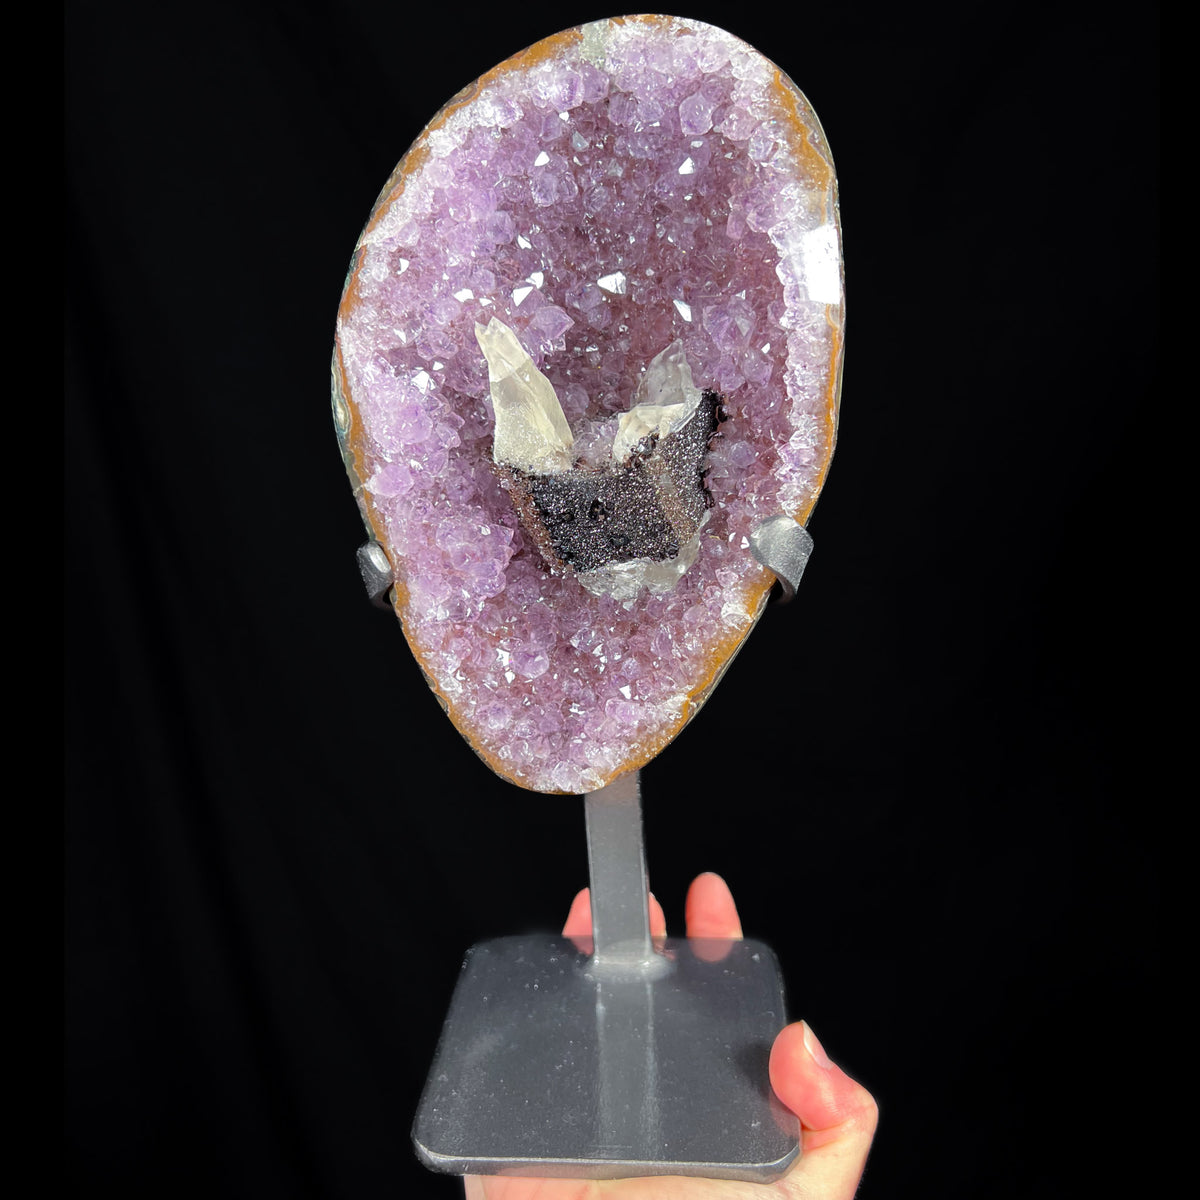 Large Amethyst Geode with Calcite and Hematite Crystals